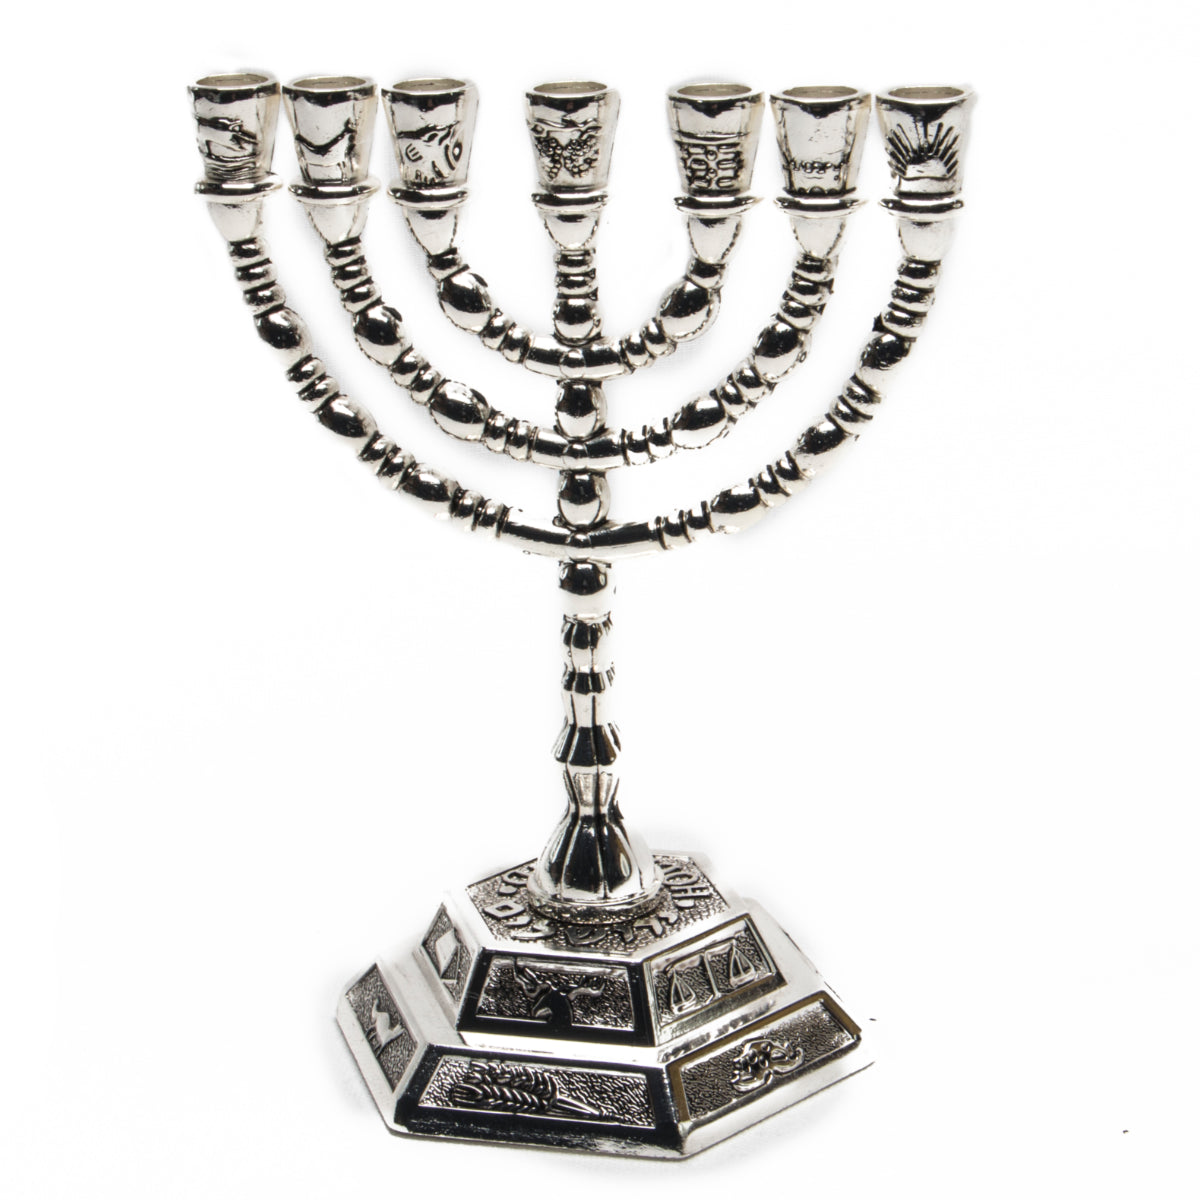 Menorah Silver Plated  from the Holyland size 5.1″ / 13 cm